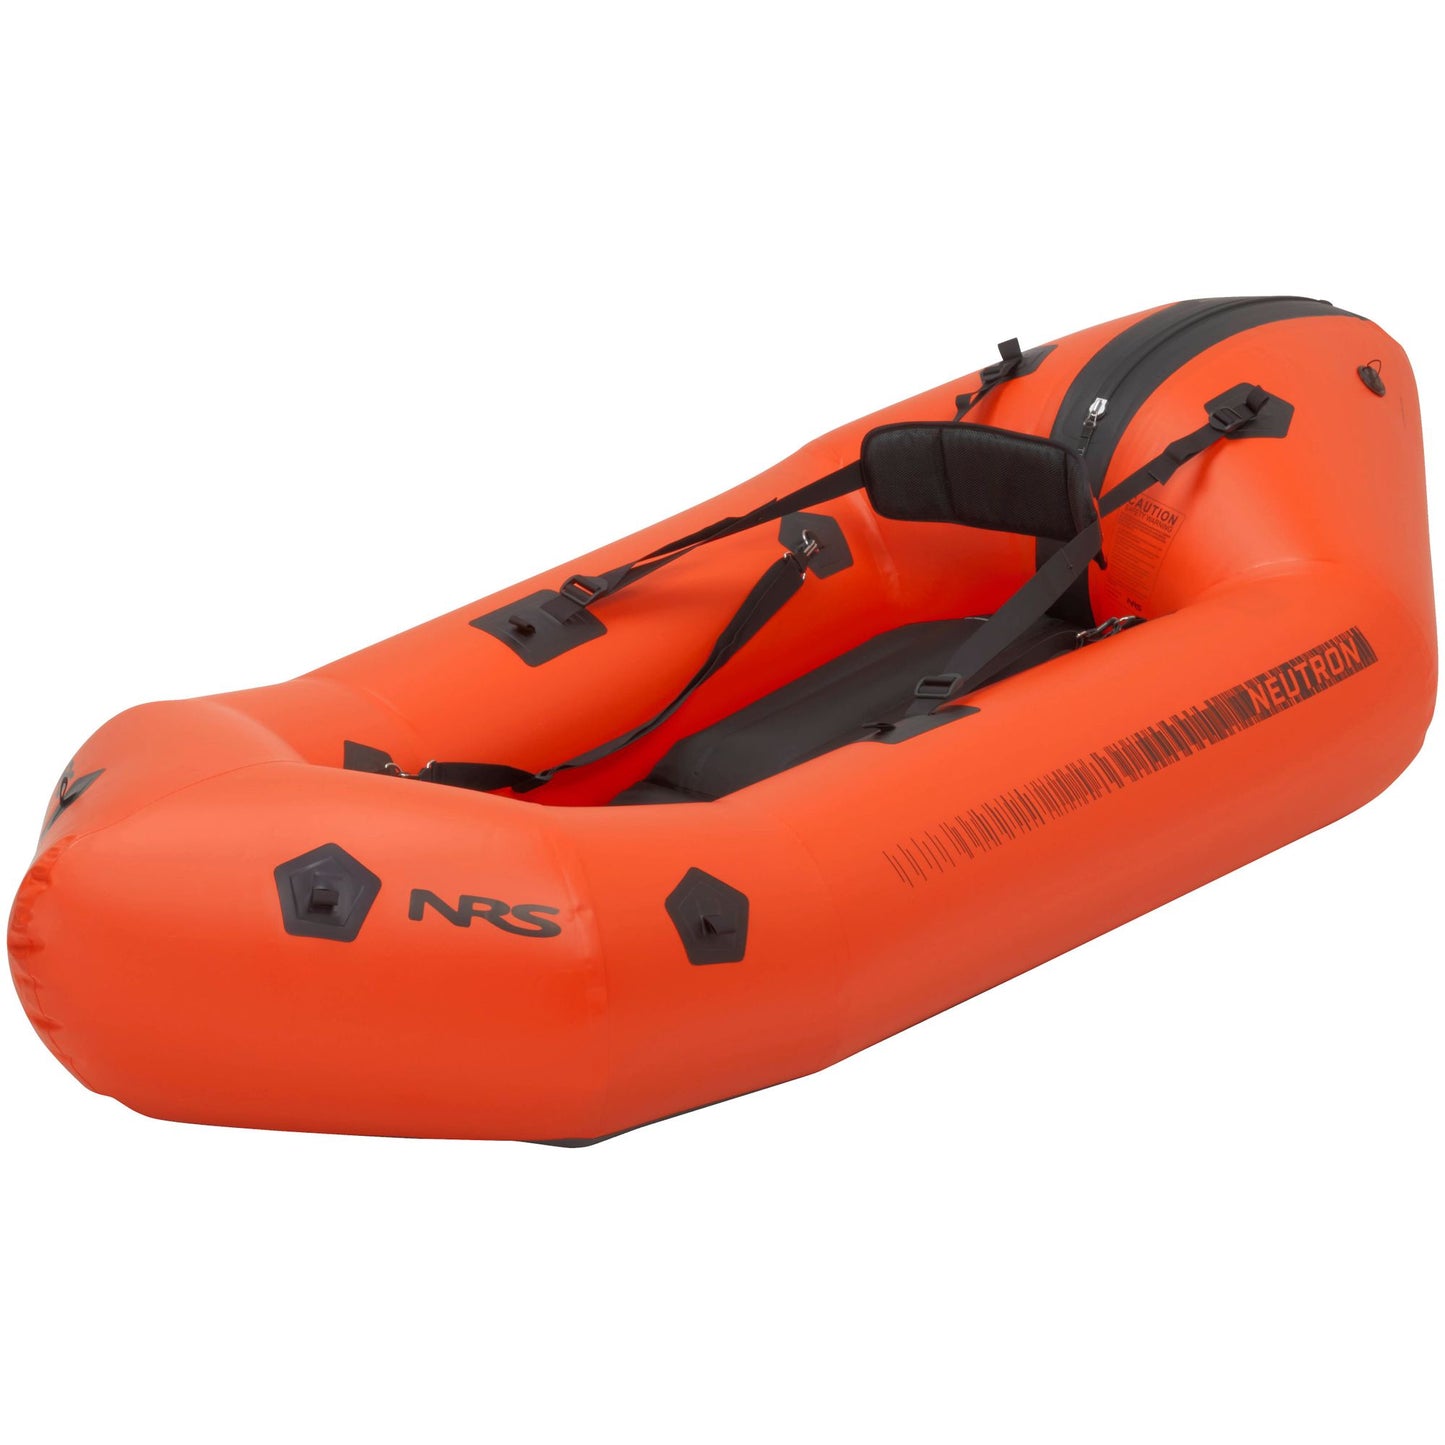 Inflatable orange Neutron packraft with black seats and a self-bailing floor, isolated on a white background by NRS.